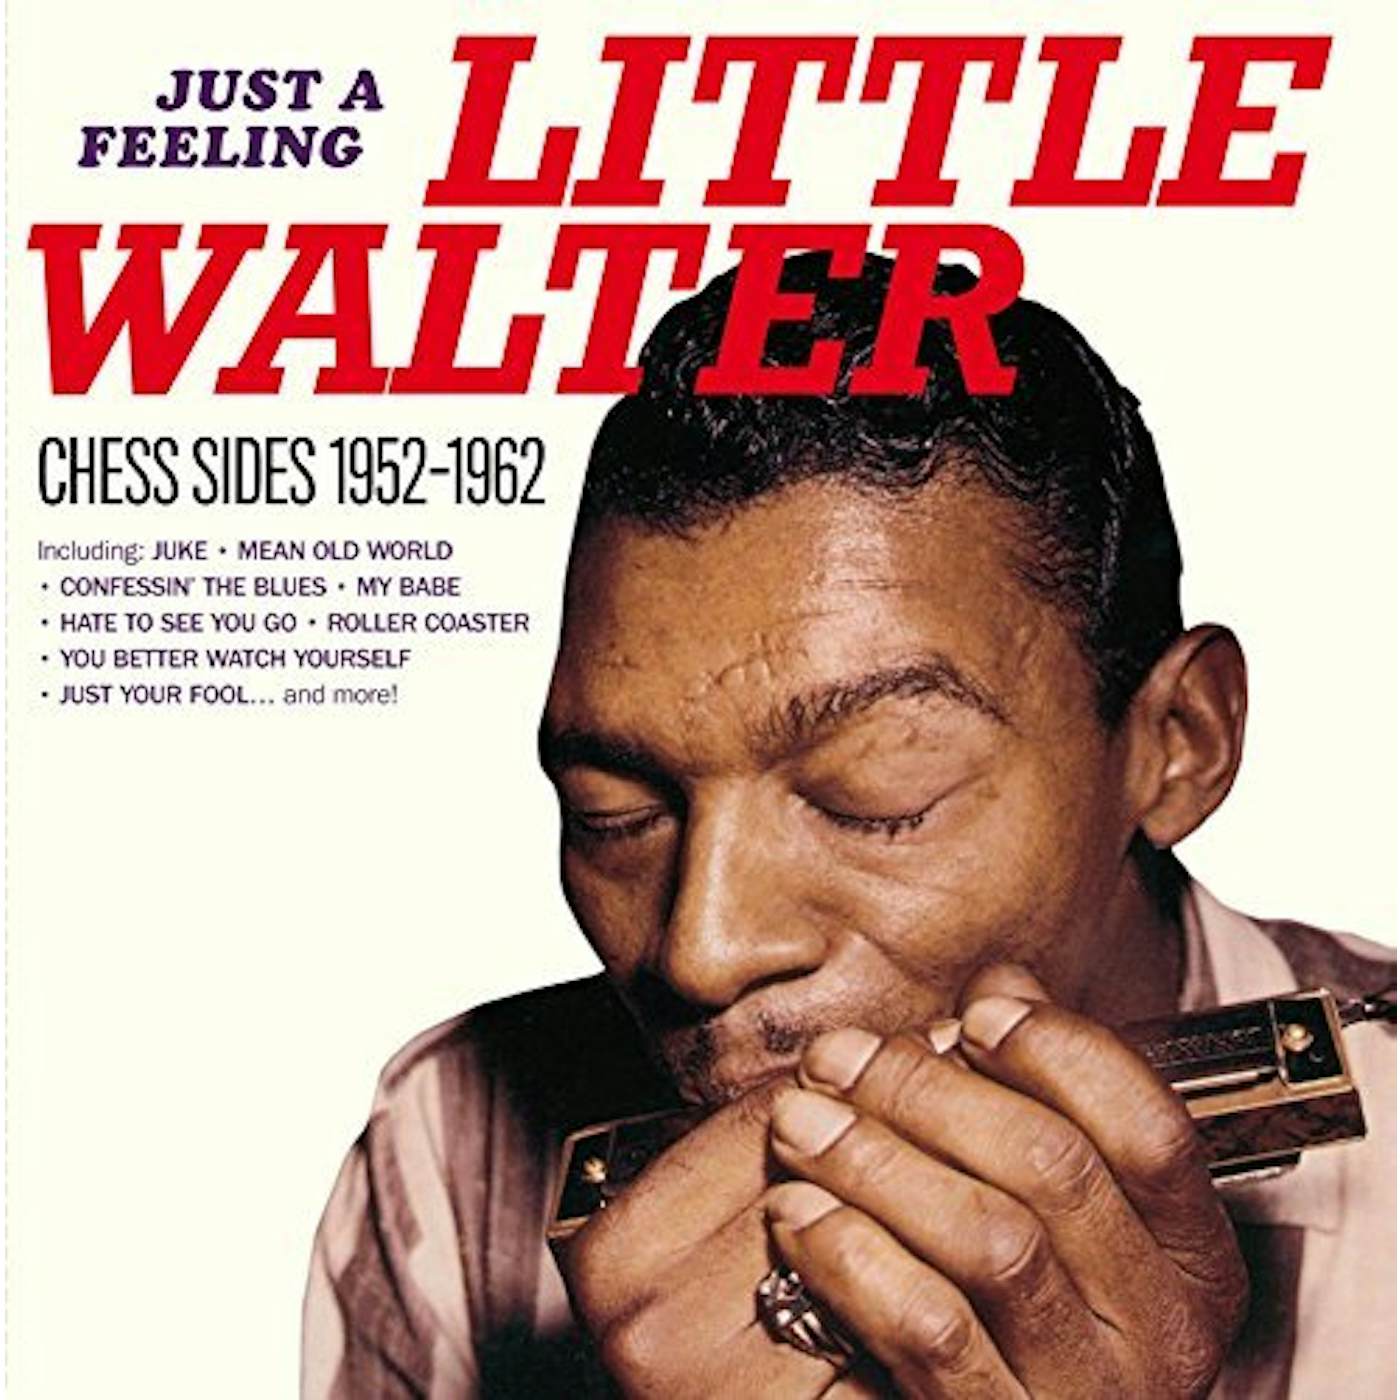 Little Walter JUST A FEELING: CHESS SIDES 1952-1962 Vinyl Record